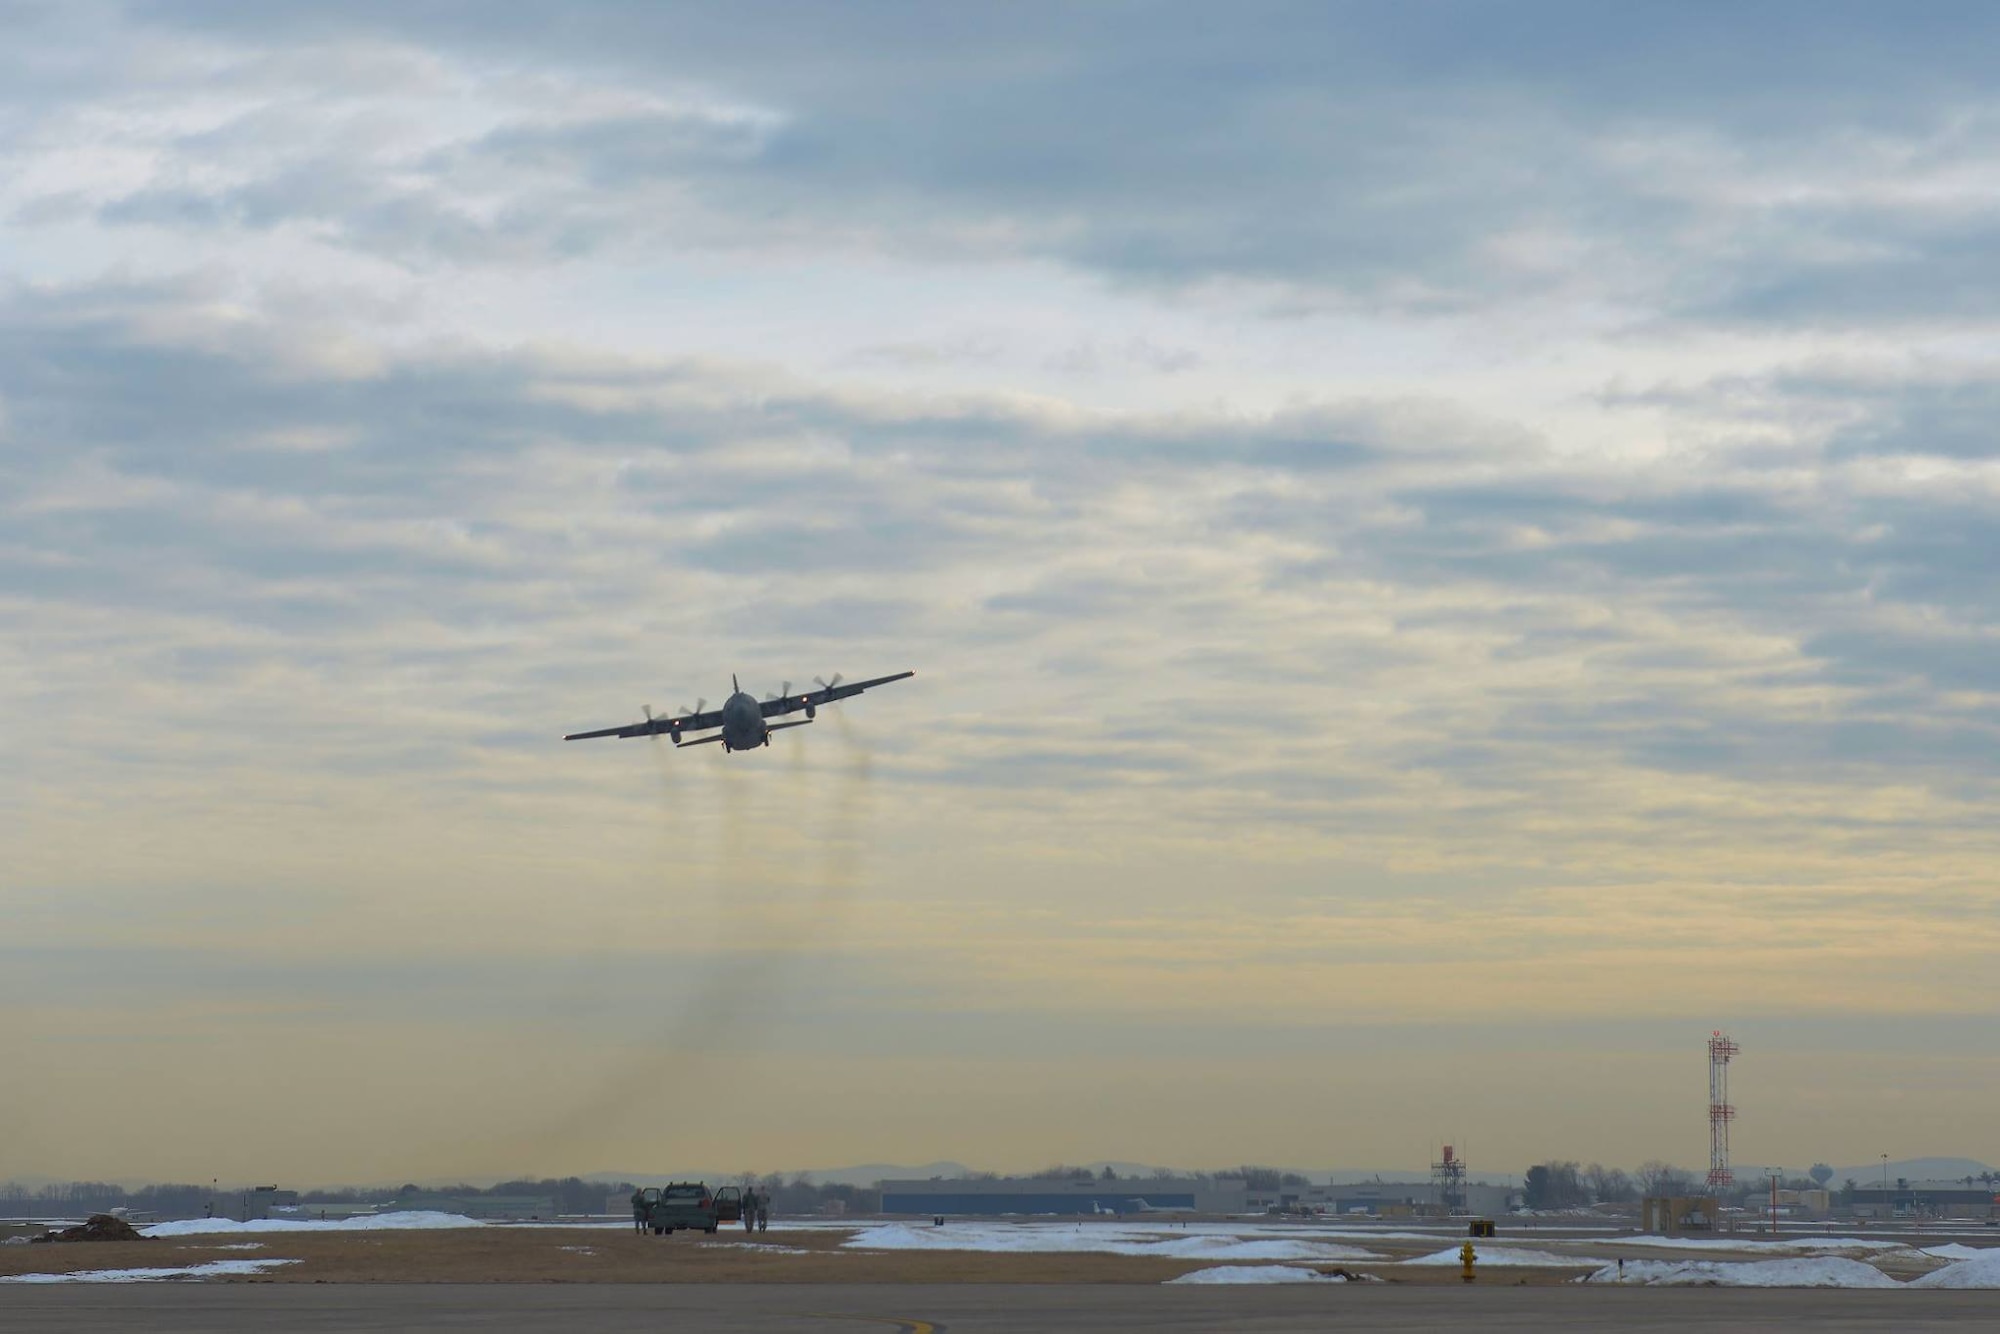 A 103rd Airlift Wing C-130 Hercules, with deploying Airmen on board, takes off from Bradley Air National Guard Base, East Granby, Conn., Feb. 22, 2017. This C-130 is headed to the Middle East in support of deployment operations. (U.S. Air National Guard photo by 2nd Lt. Jen Pierce)